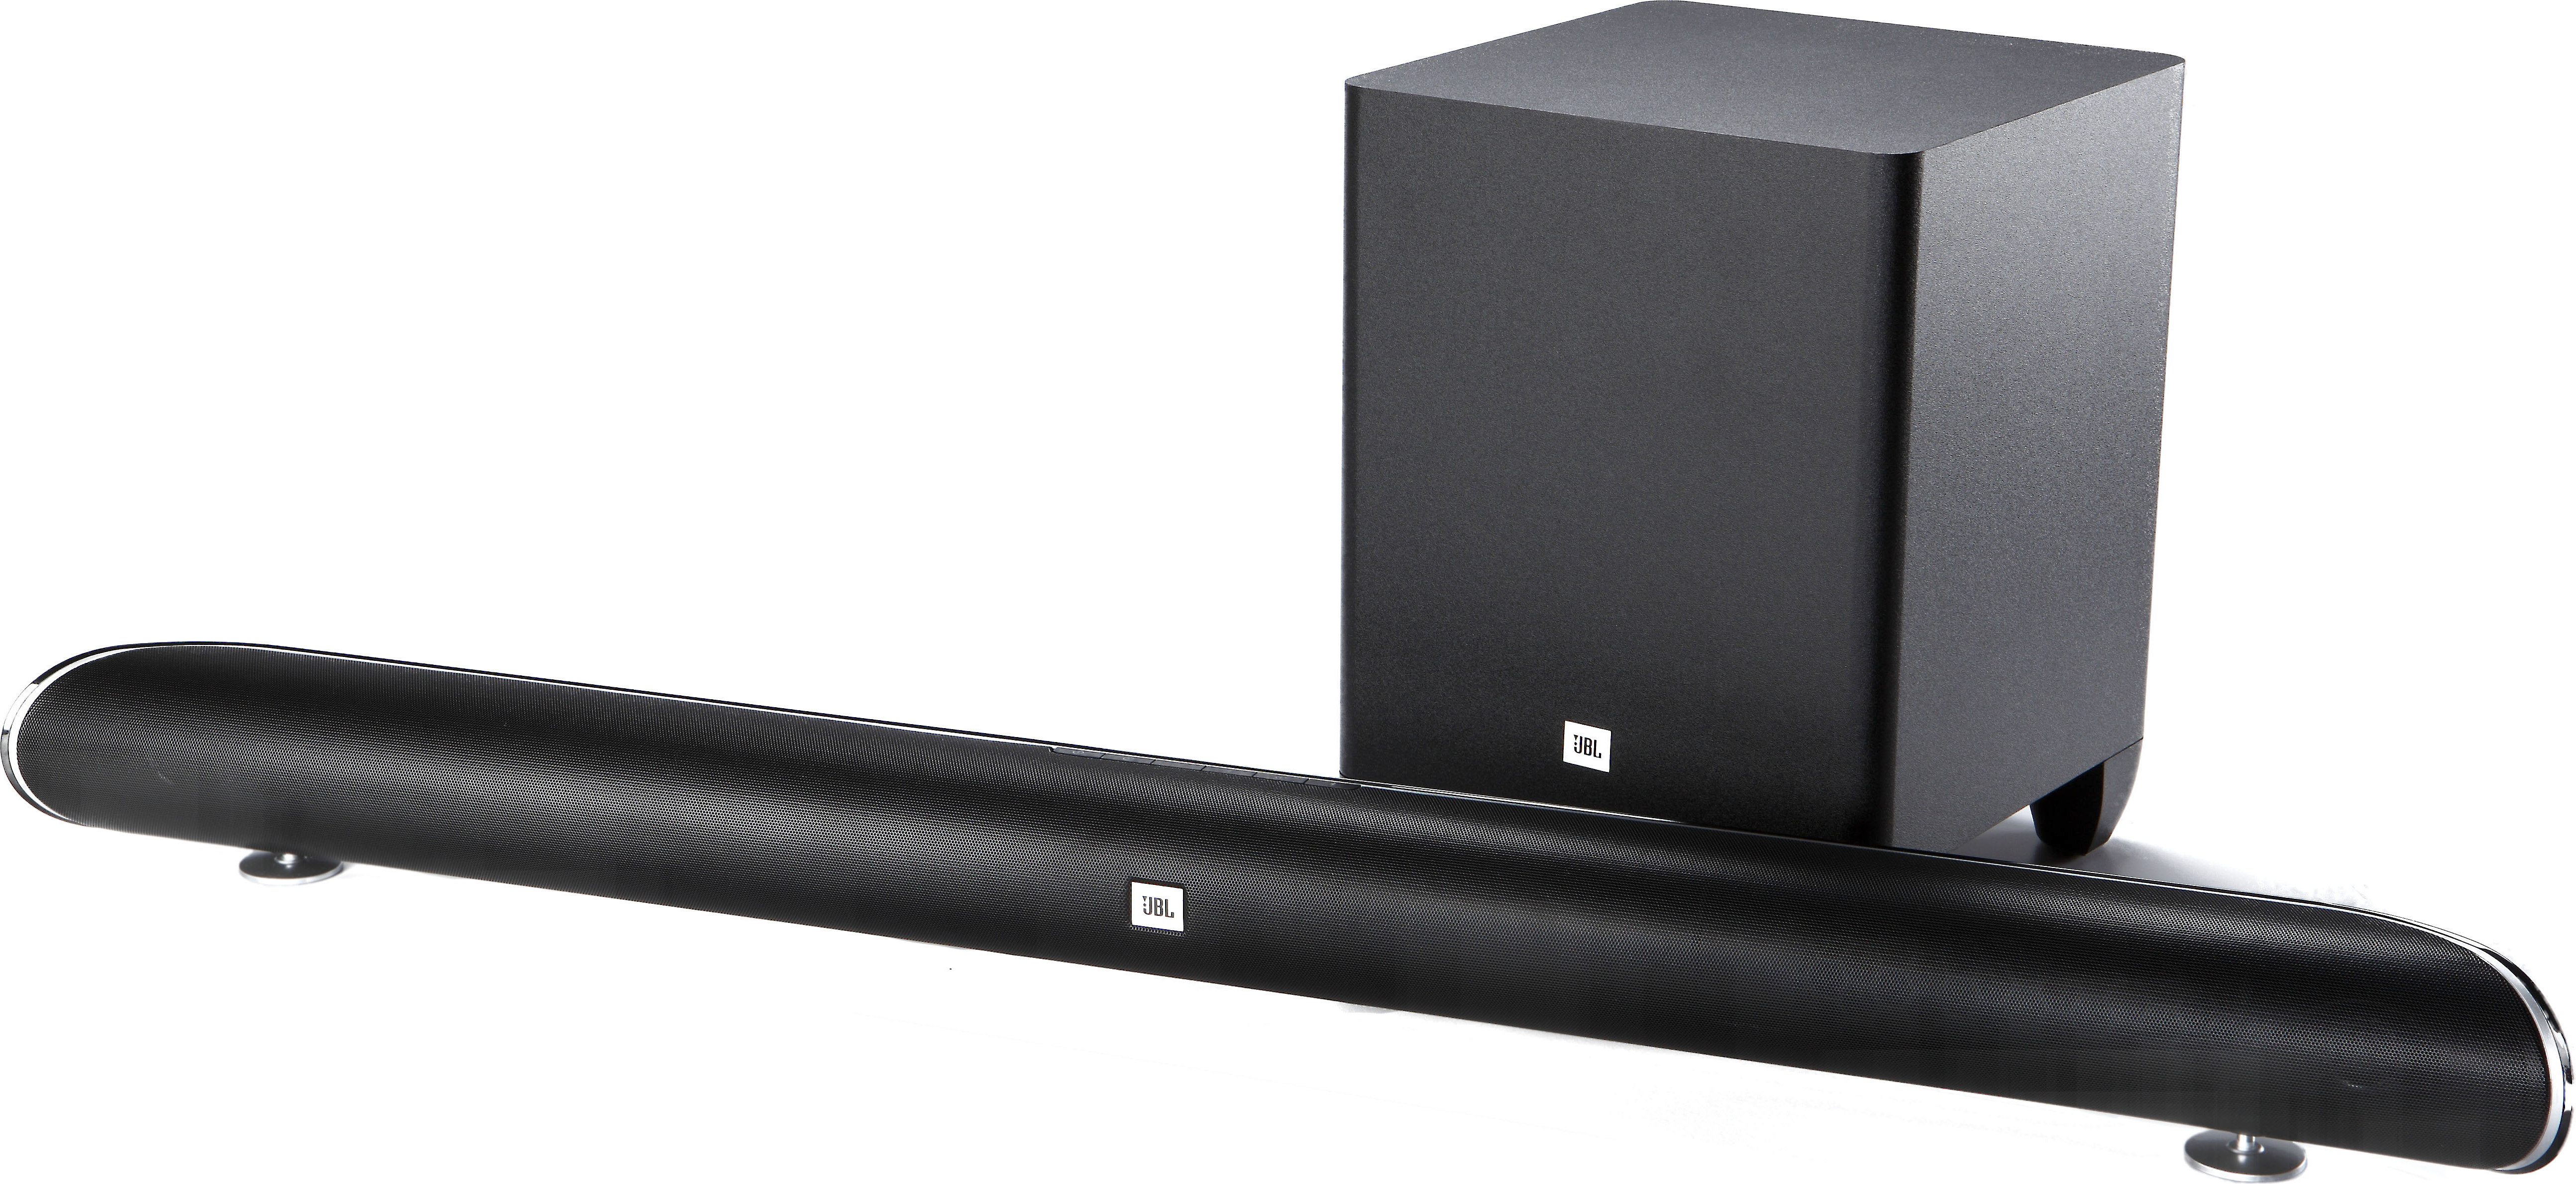 Jbl Cinema Sb350 Powered Home Theater Sound Bar With Wireless Subwoofer And Bluetooth At Crutchfield